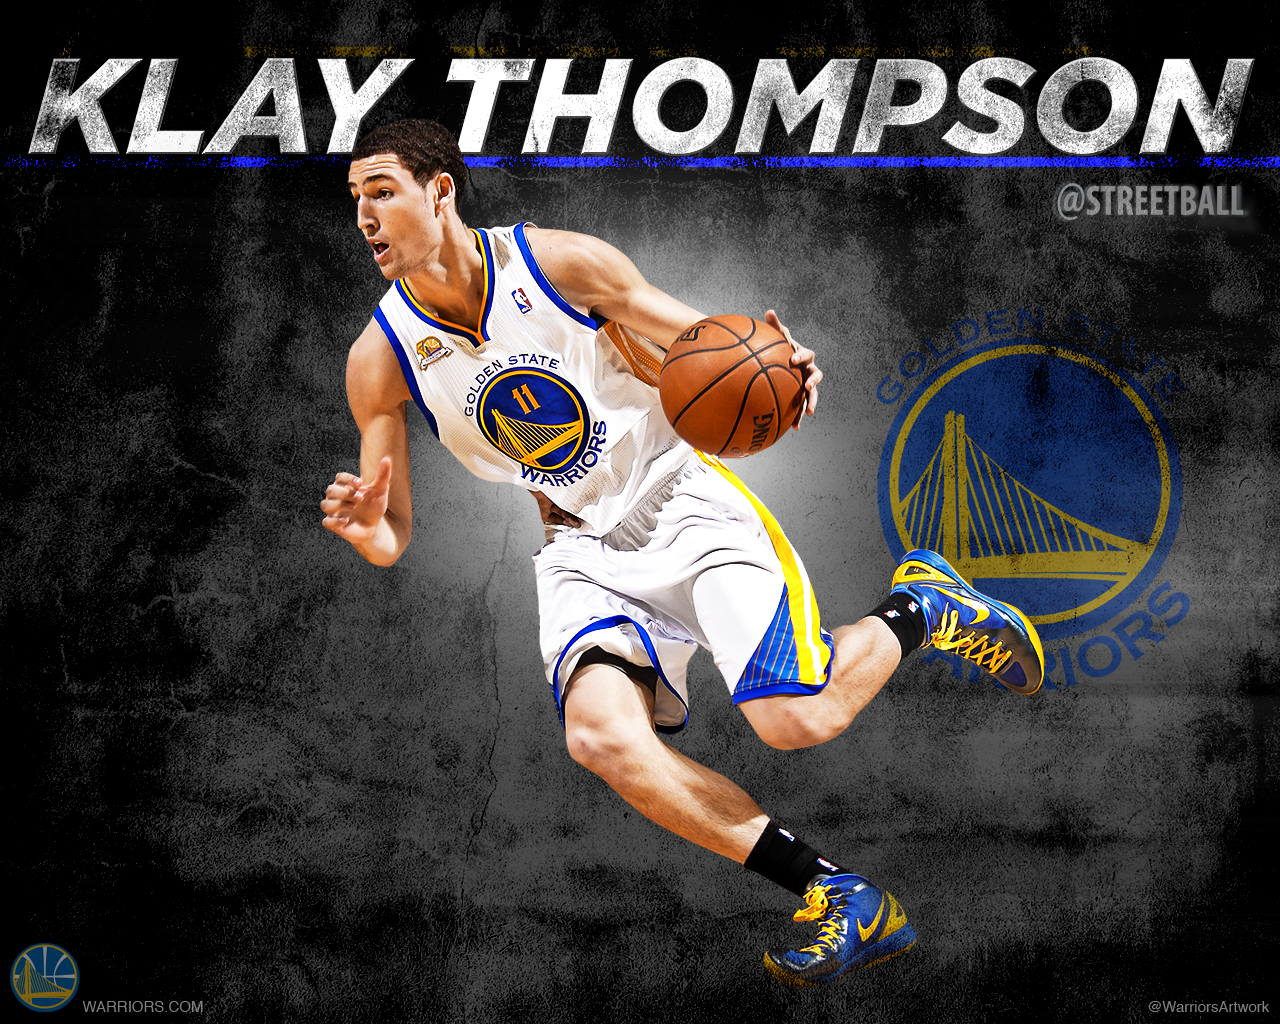 NBA Wallpapers on Twitter Wallpaper of KlayThompson one of 4 Warriors  players on 2016 USA roster Download full size of wallpaper at   httpstcoNpomJ9yVzU  httpstcoY6LE6ULoli  Twitter